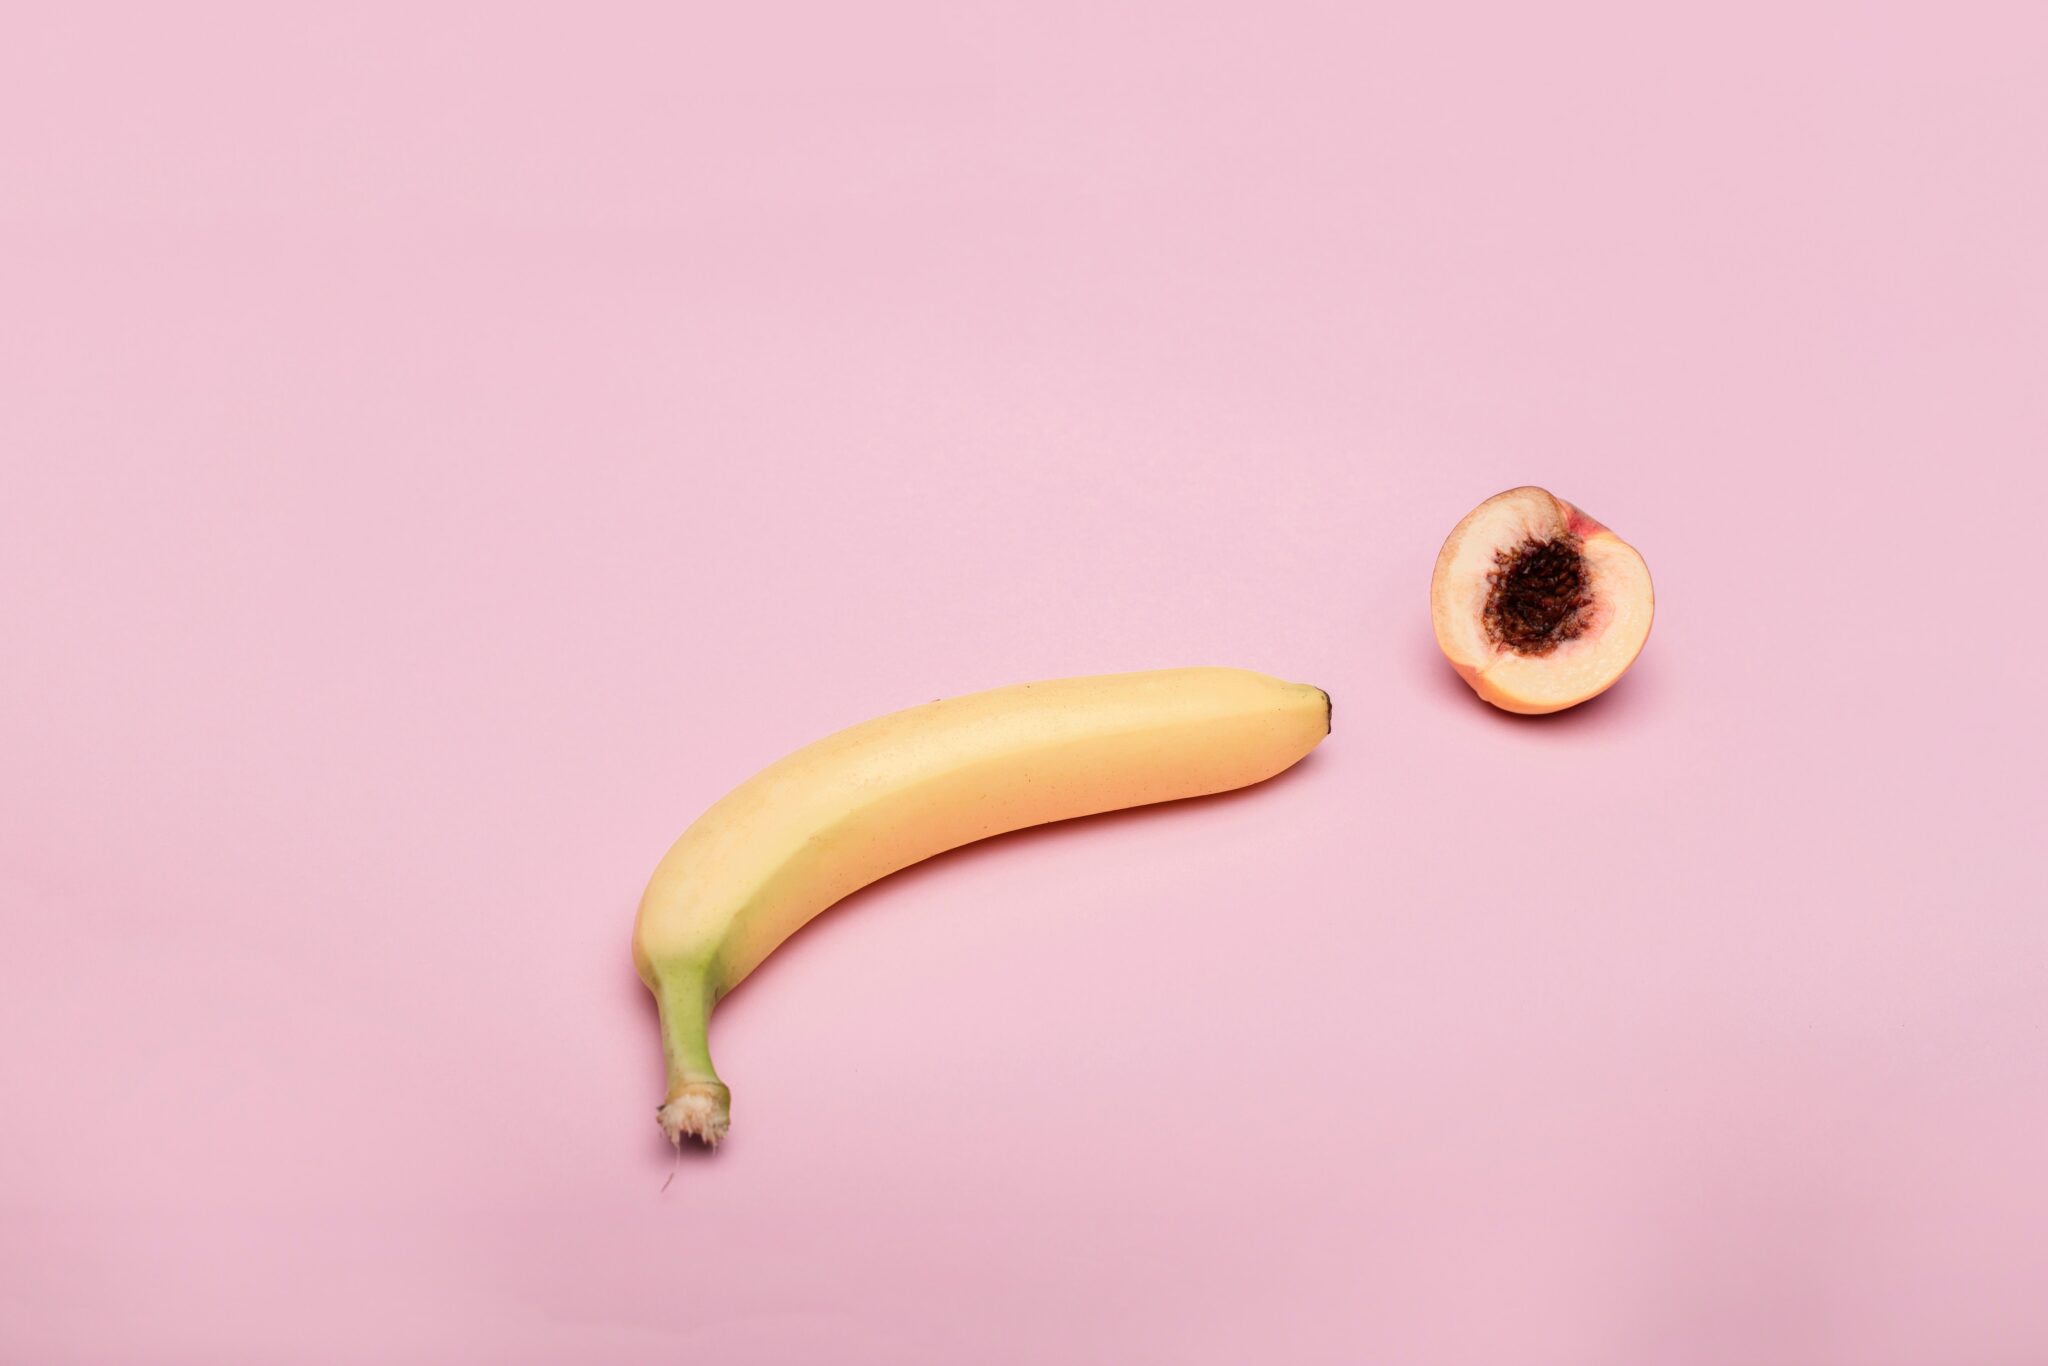 A banana laying flaccid next to an opened fruit.